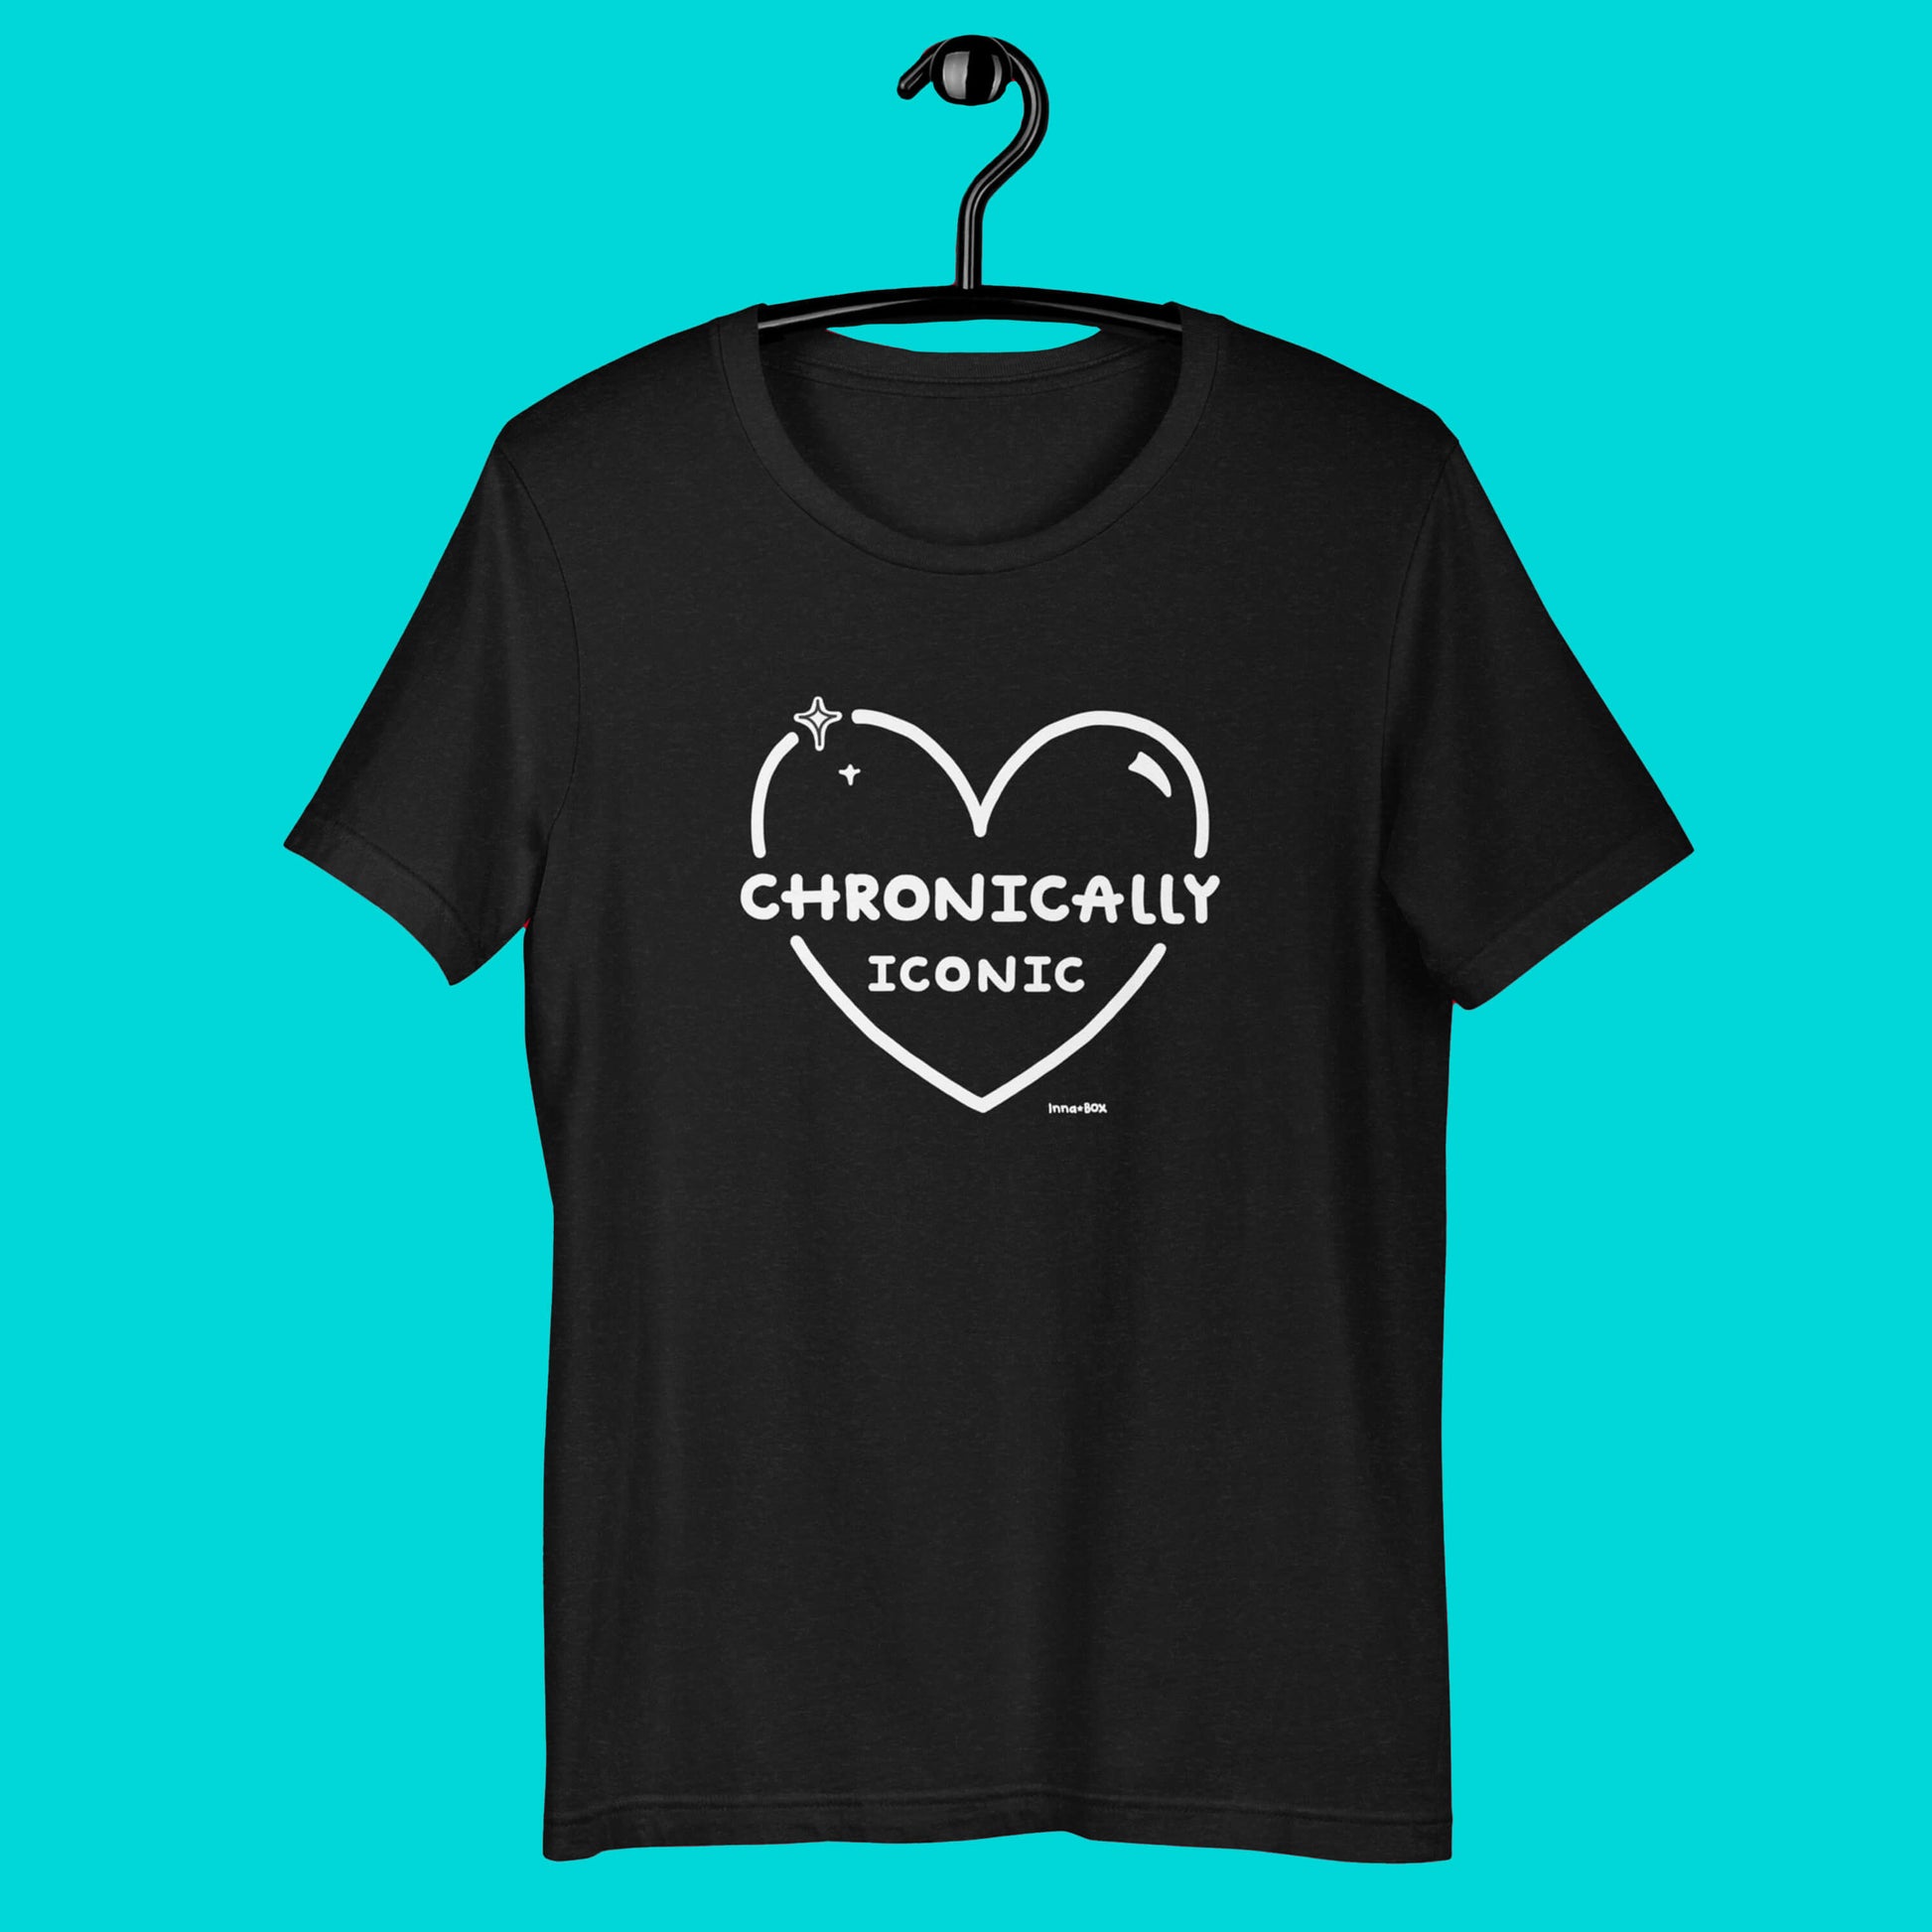 The Chronically Iconic black tee hanging up on a black hanger over a blue background. The short sleeve t-shirt features a white heart outline with sparkles and centre text reading 'chronically iconic' with the innabox logo underneath. The design is raising awareness for chronic illness and invisible illness.